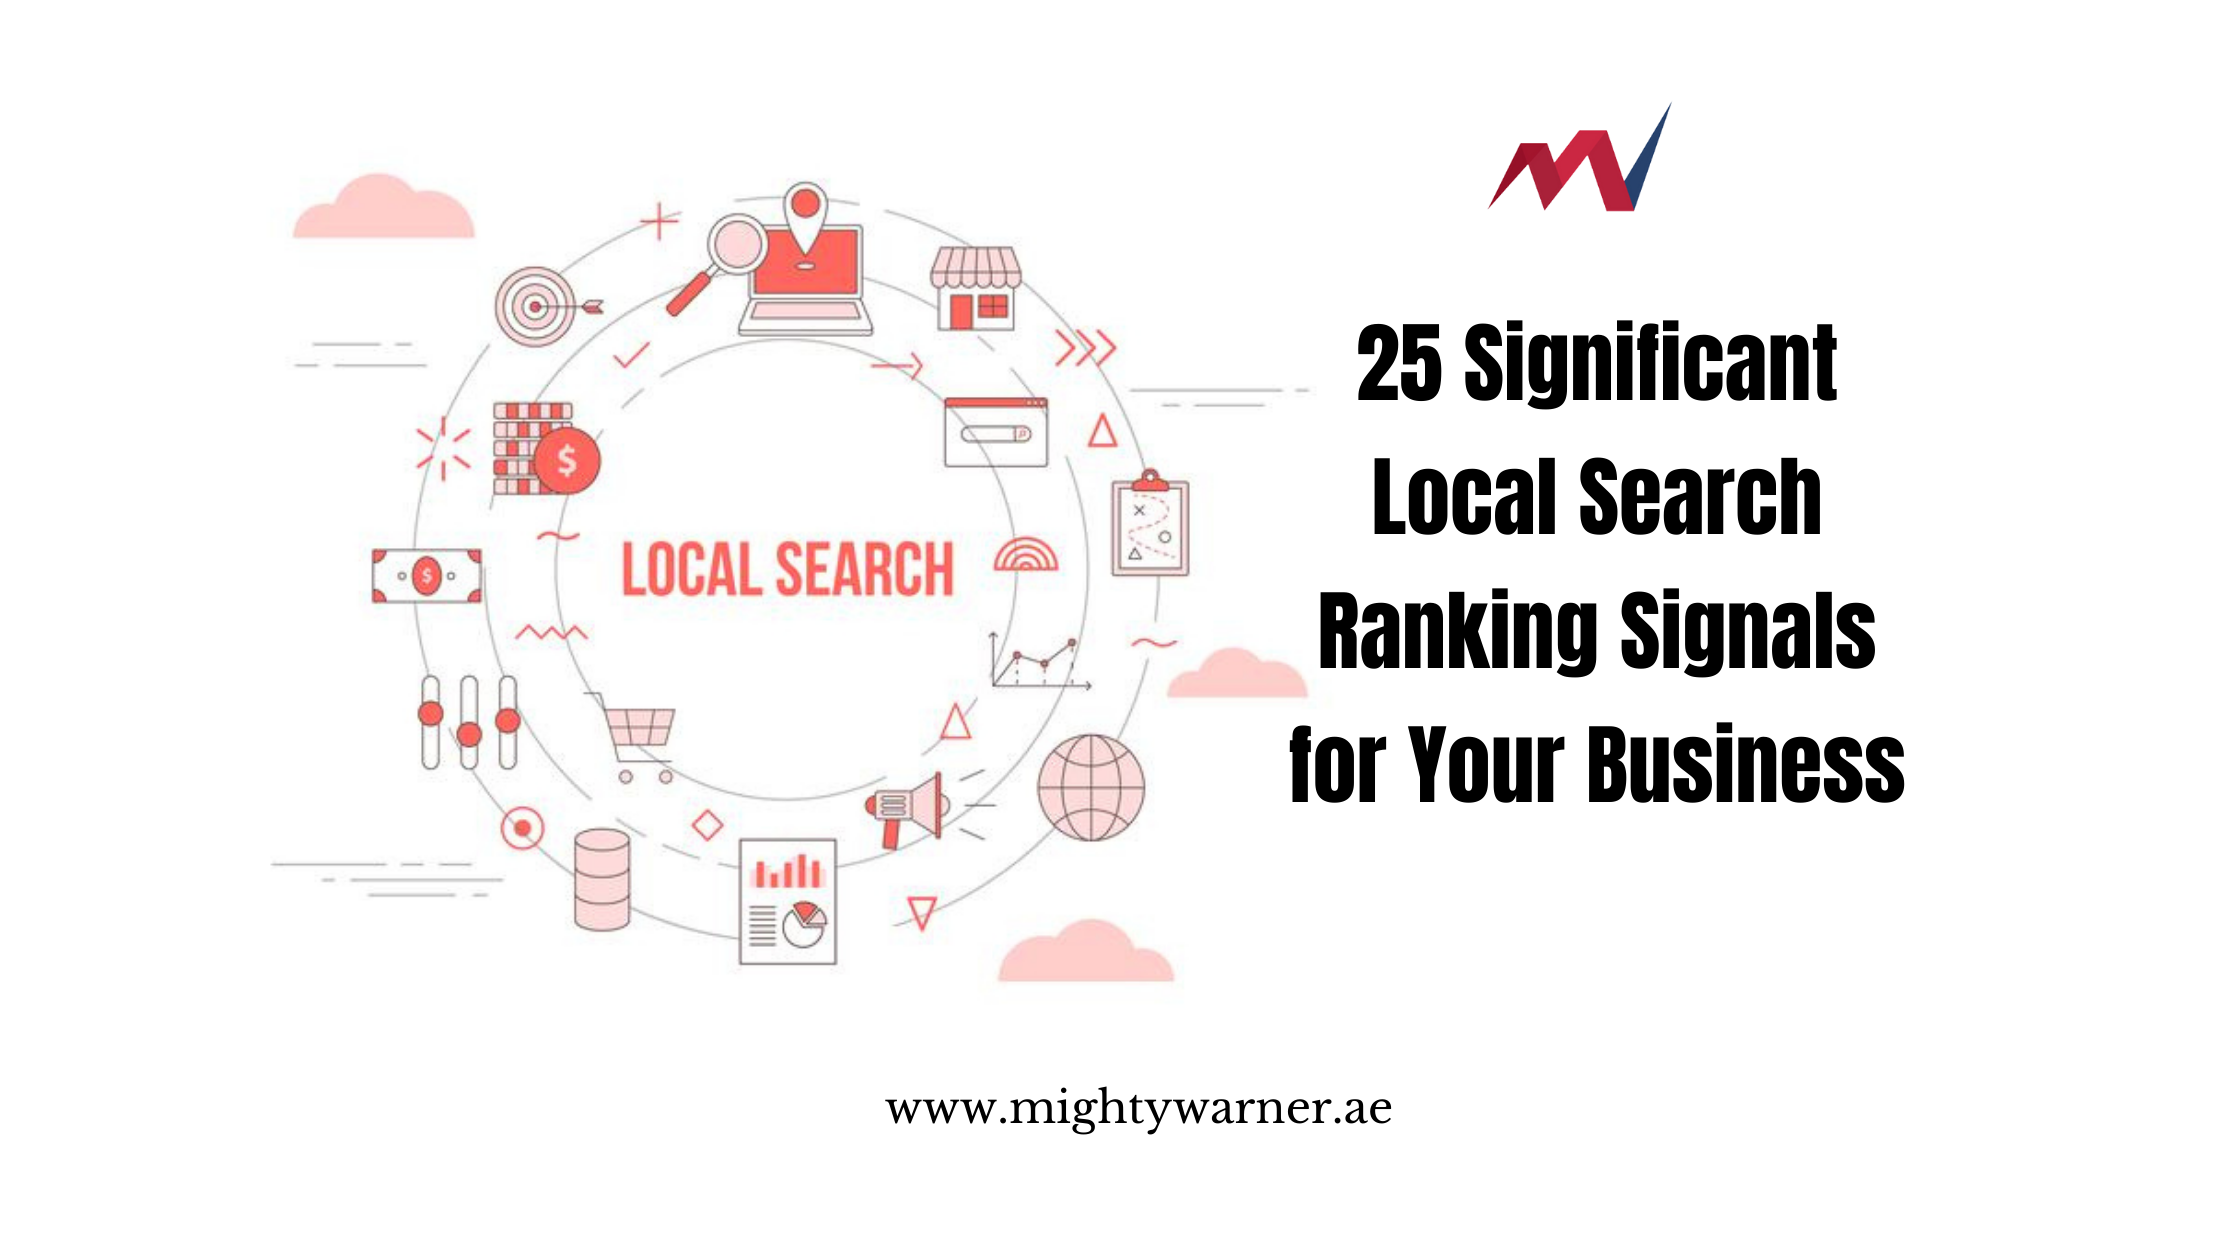 25 Significant Local Search Ranking Signals